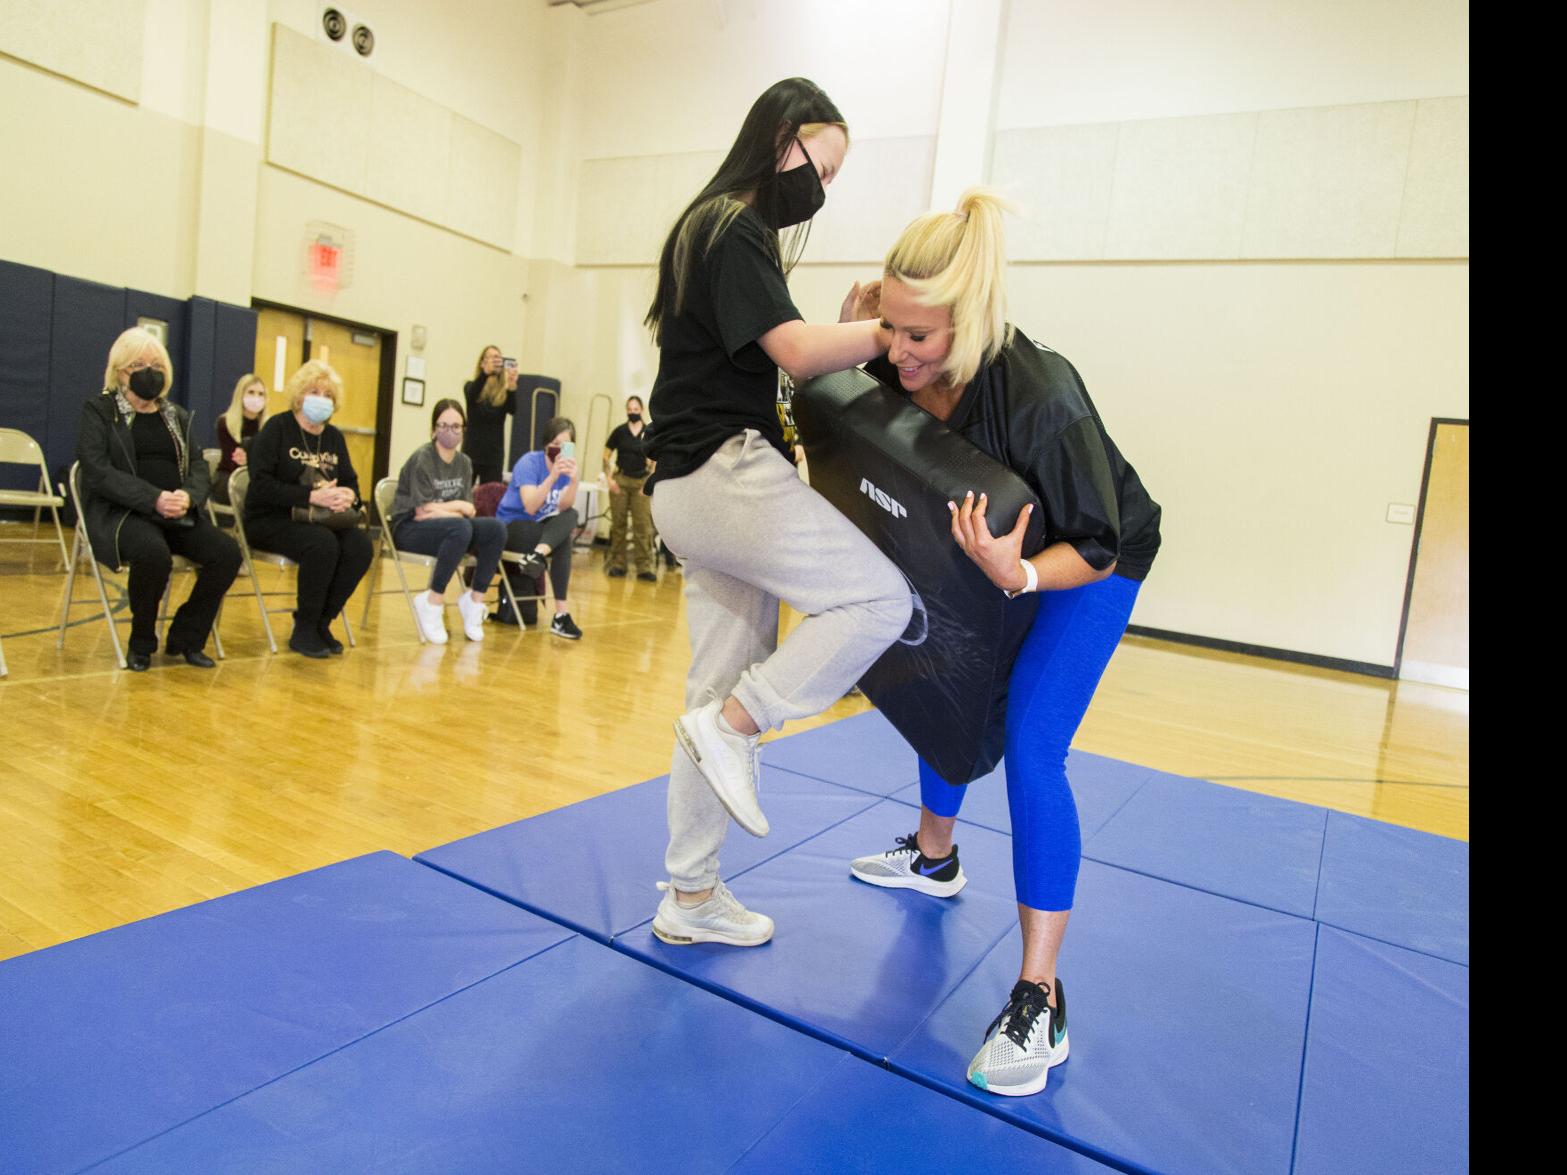 Free Women S Self Defense Class Gets Overwhelming Response From Community Local News Tulsaworld Com